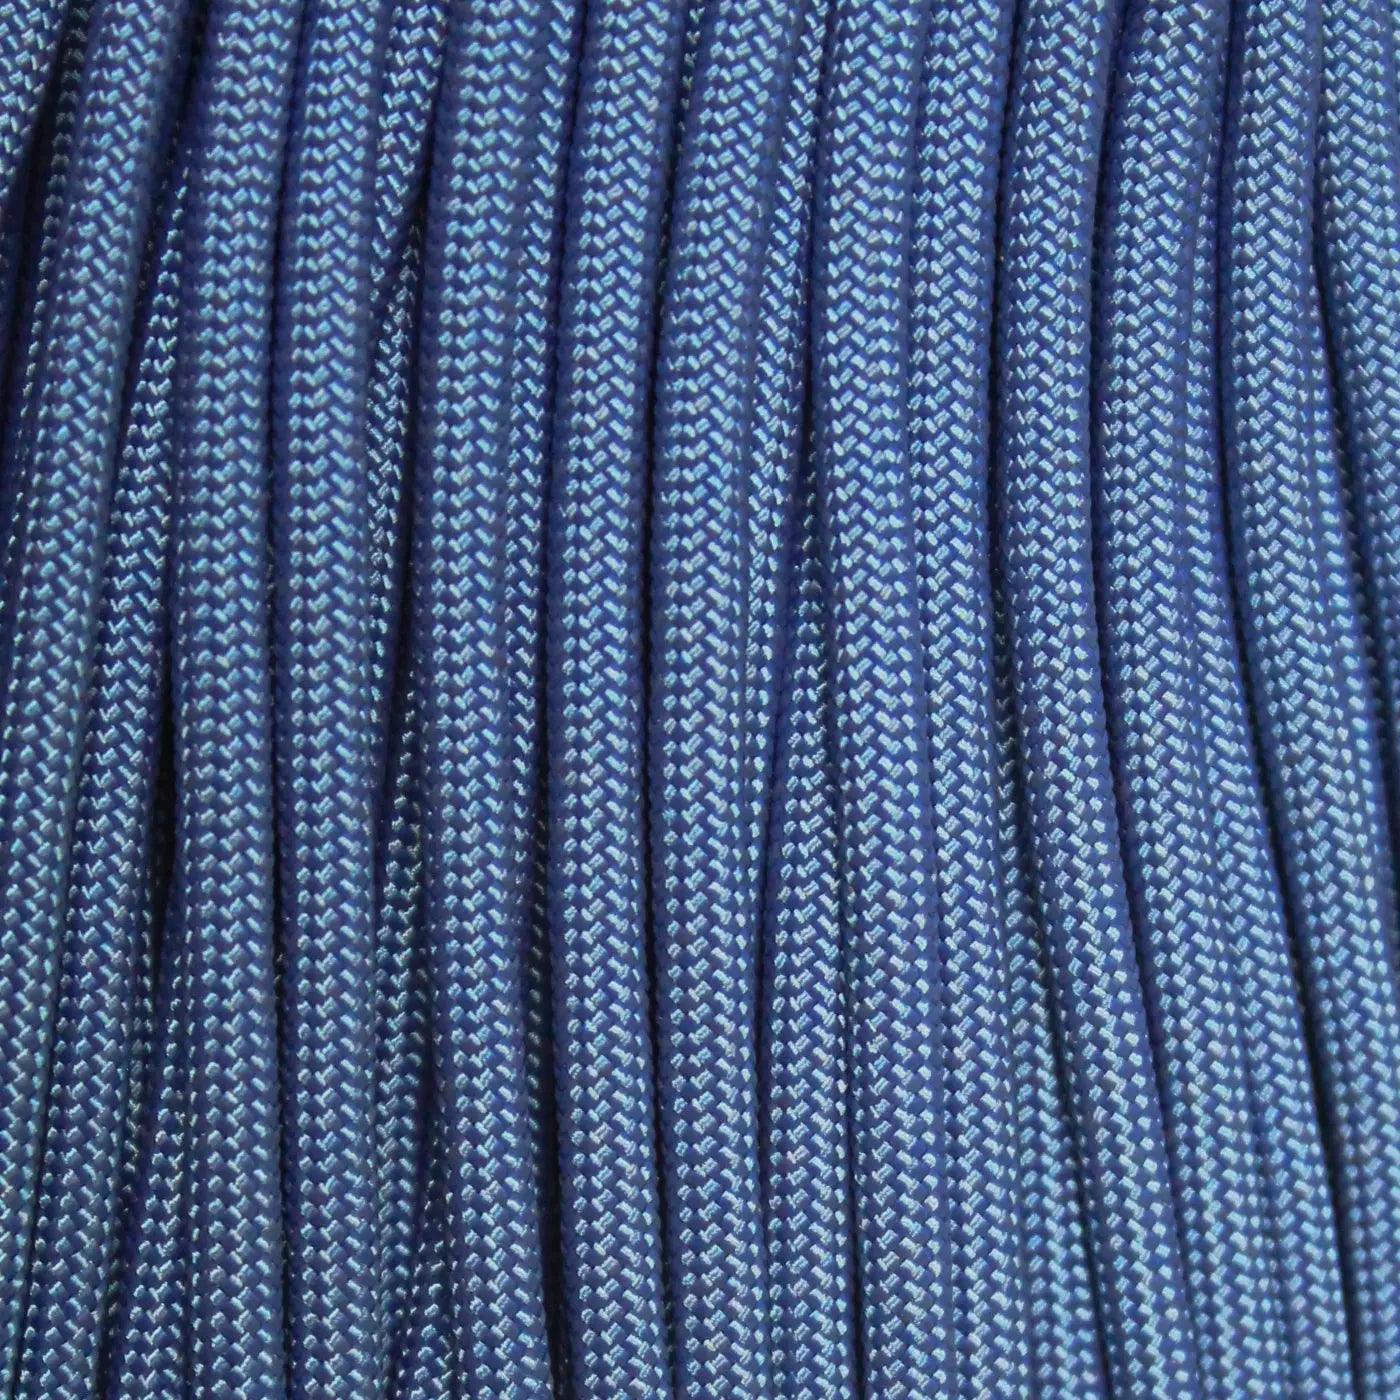 550 Paracord Cobalt Blue Made in the USA Polyester/Nylon - Paracord Galaxy